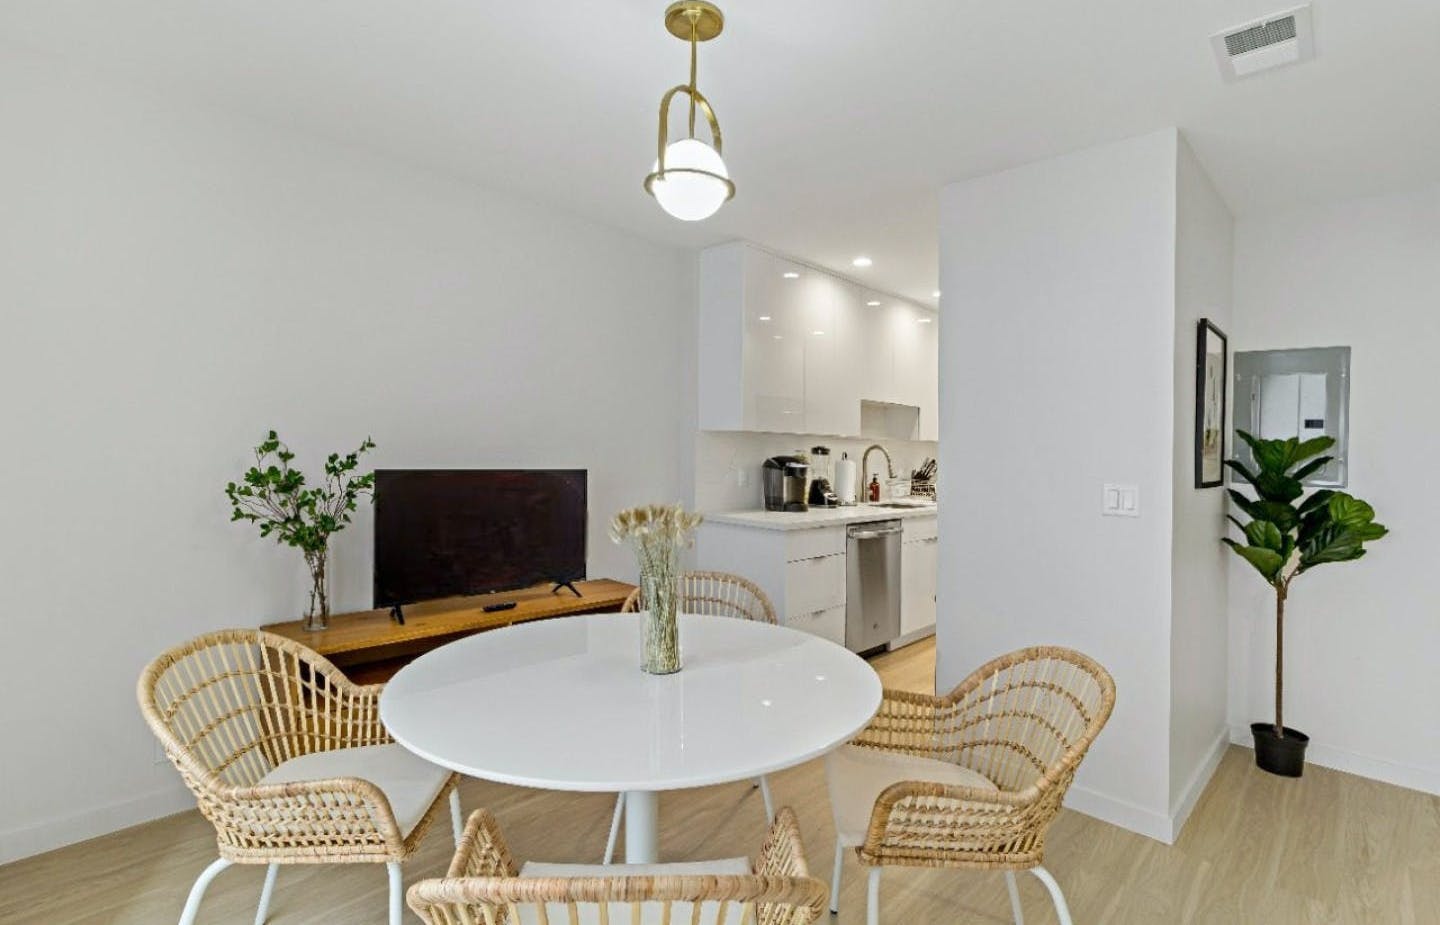 Outstanding Bright Apt. near San Francisco Cable Car Museum